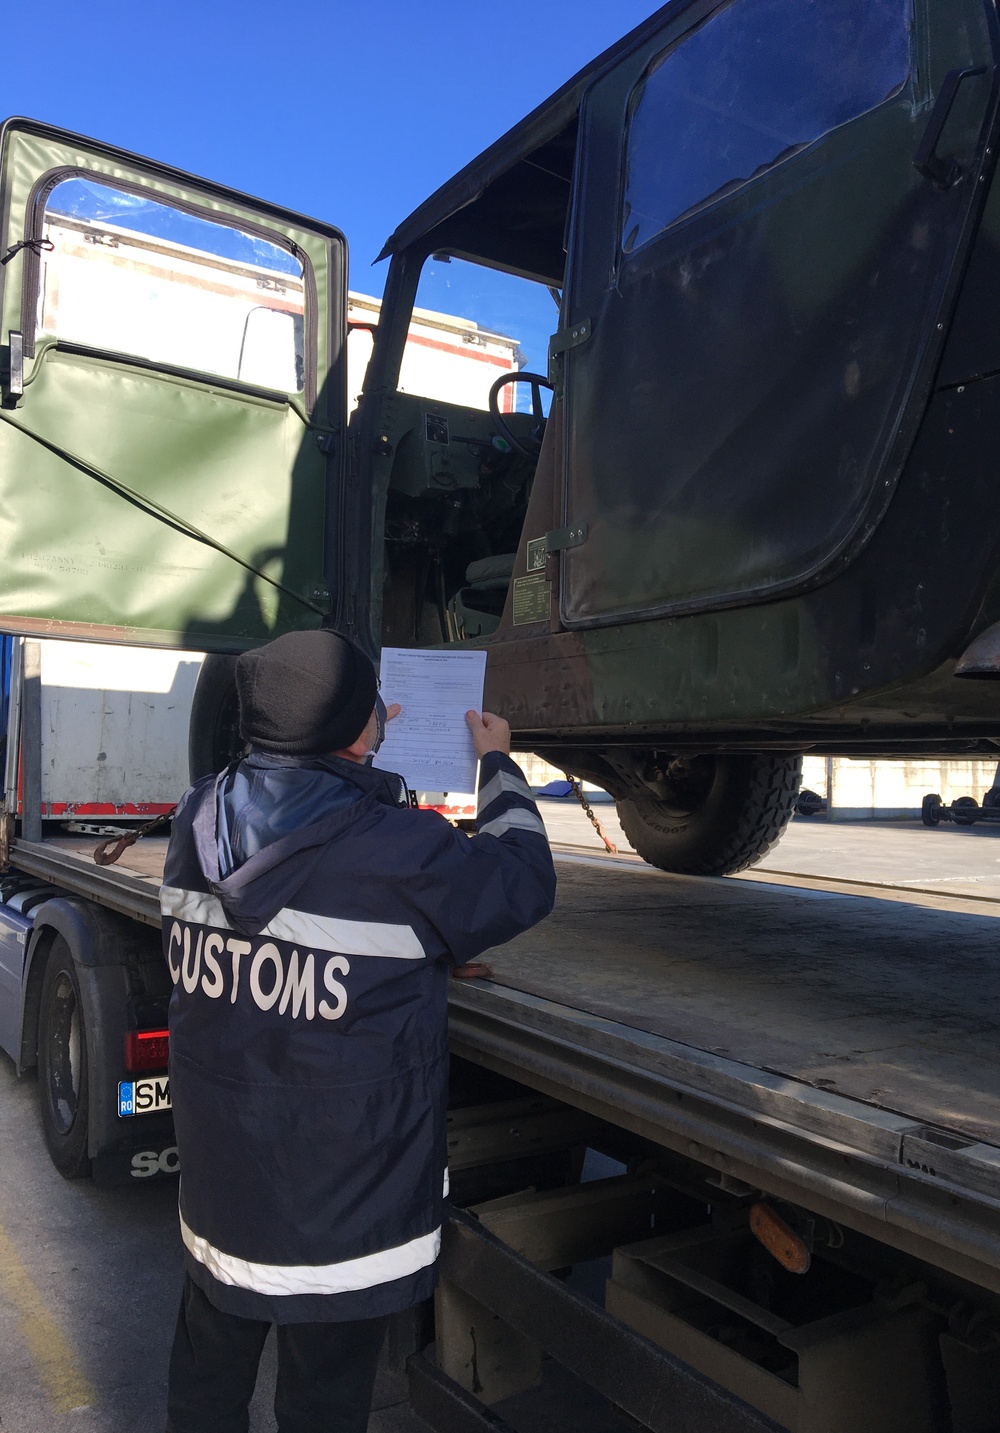 LRC Italy’s hidden heroes ensure all imports, exports are ‘customs cleared’